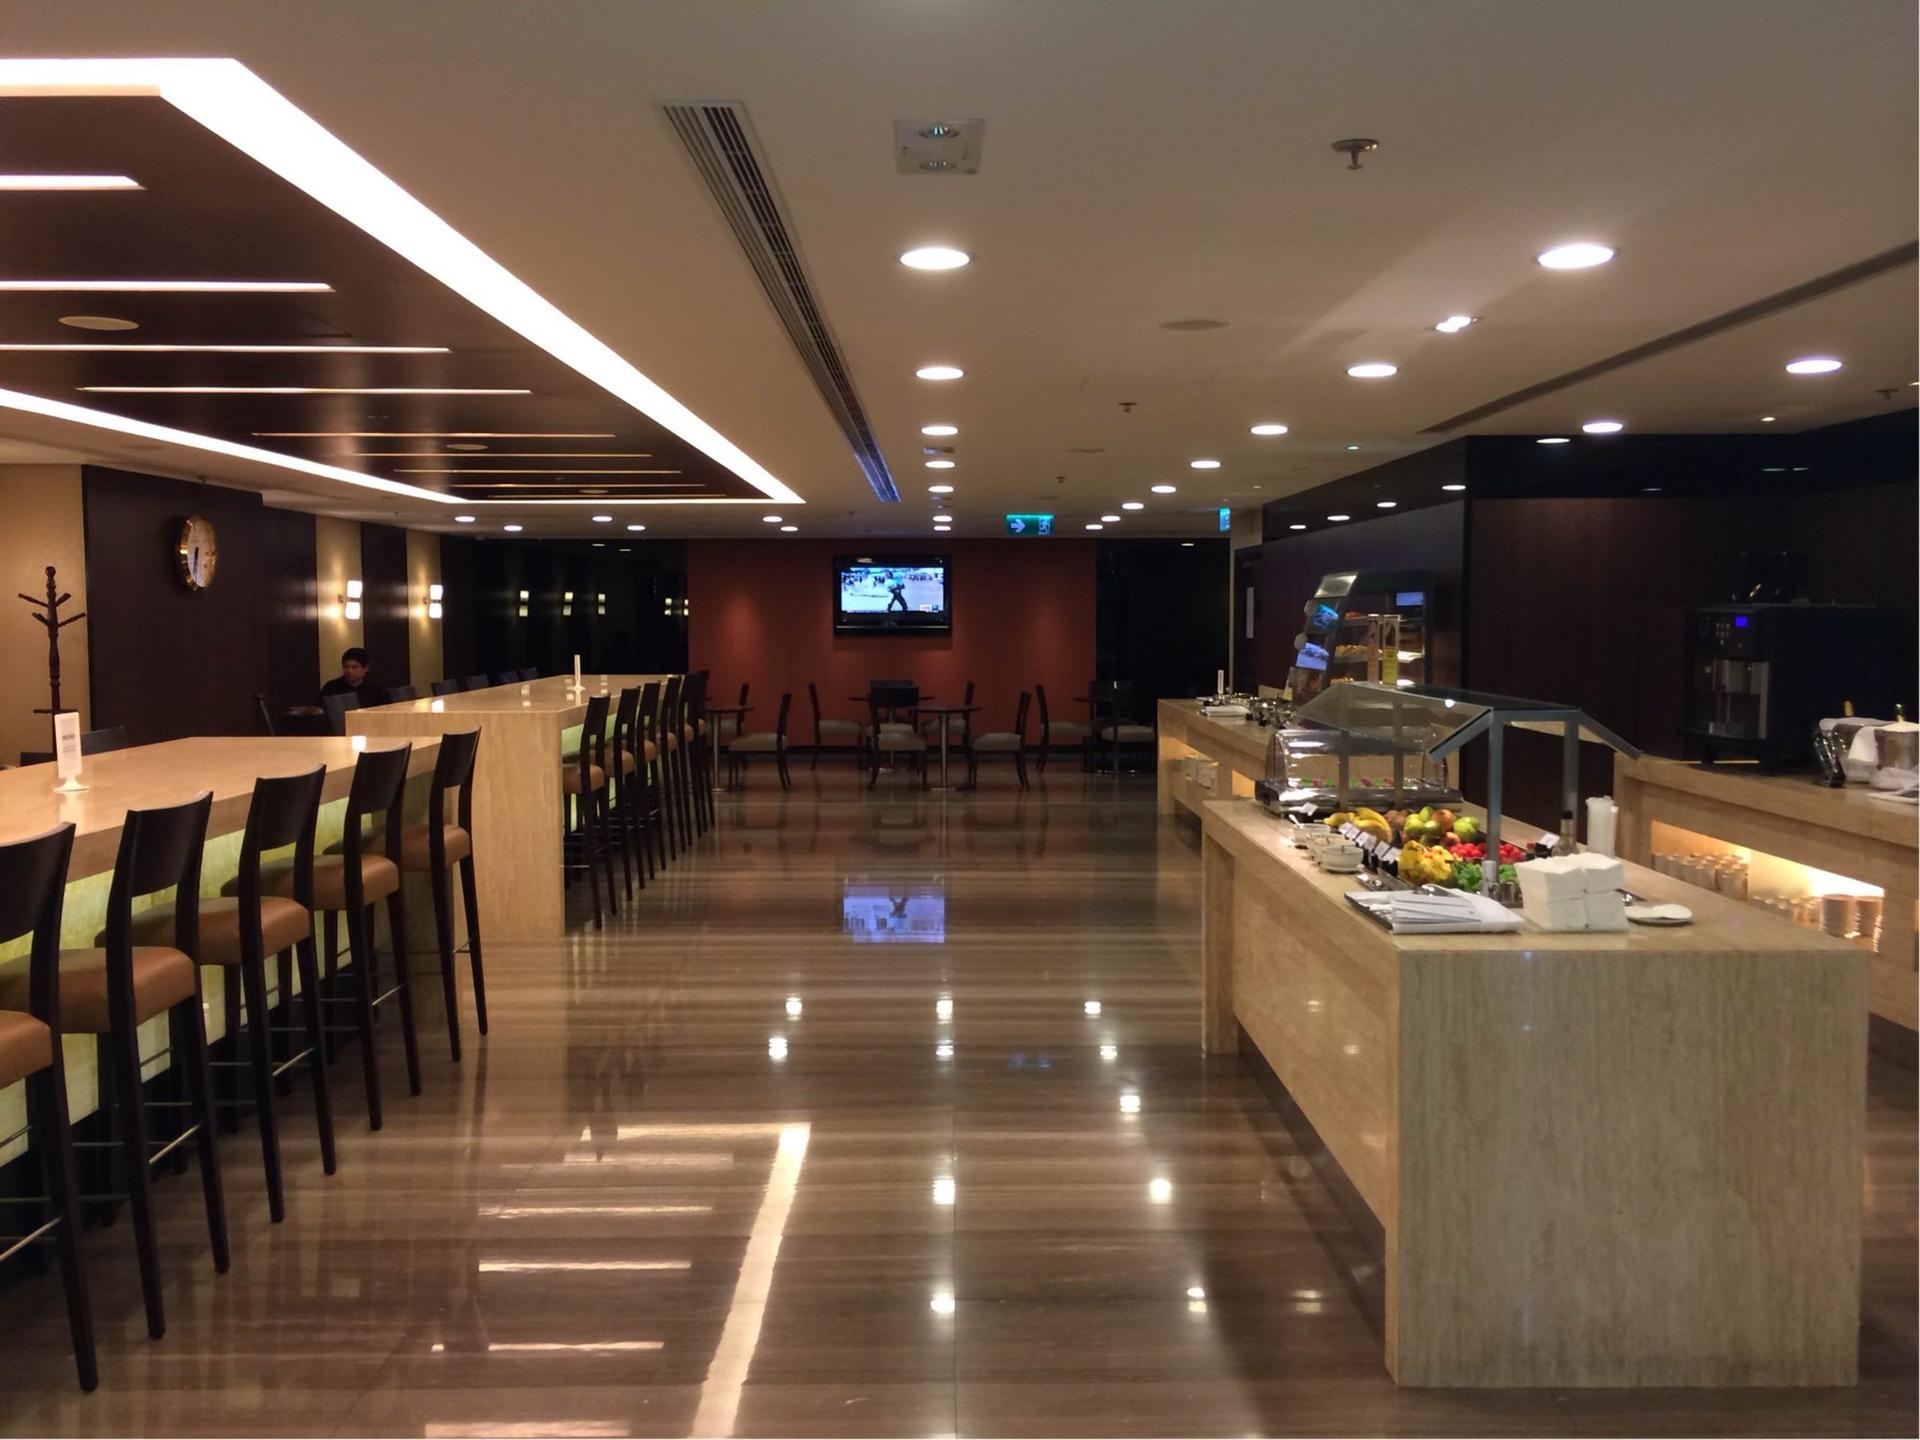 Singapore Airlines SilverKris Business Class Lounge image 54 of 68